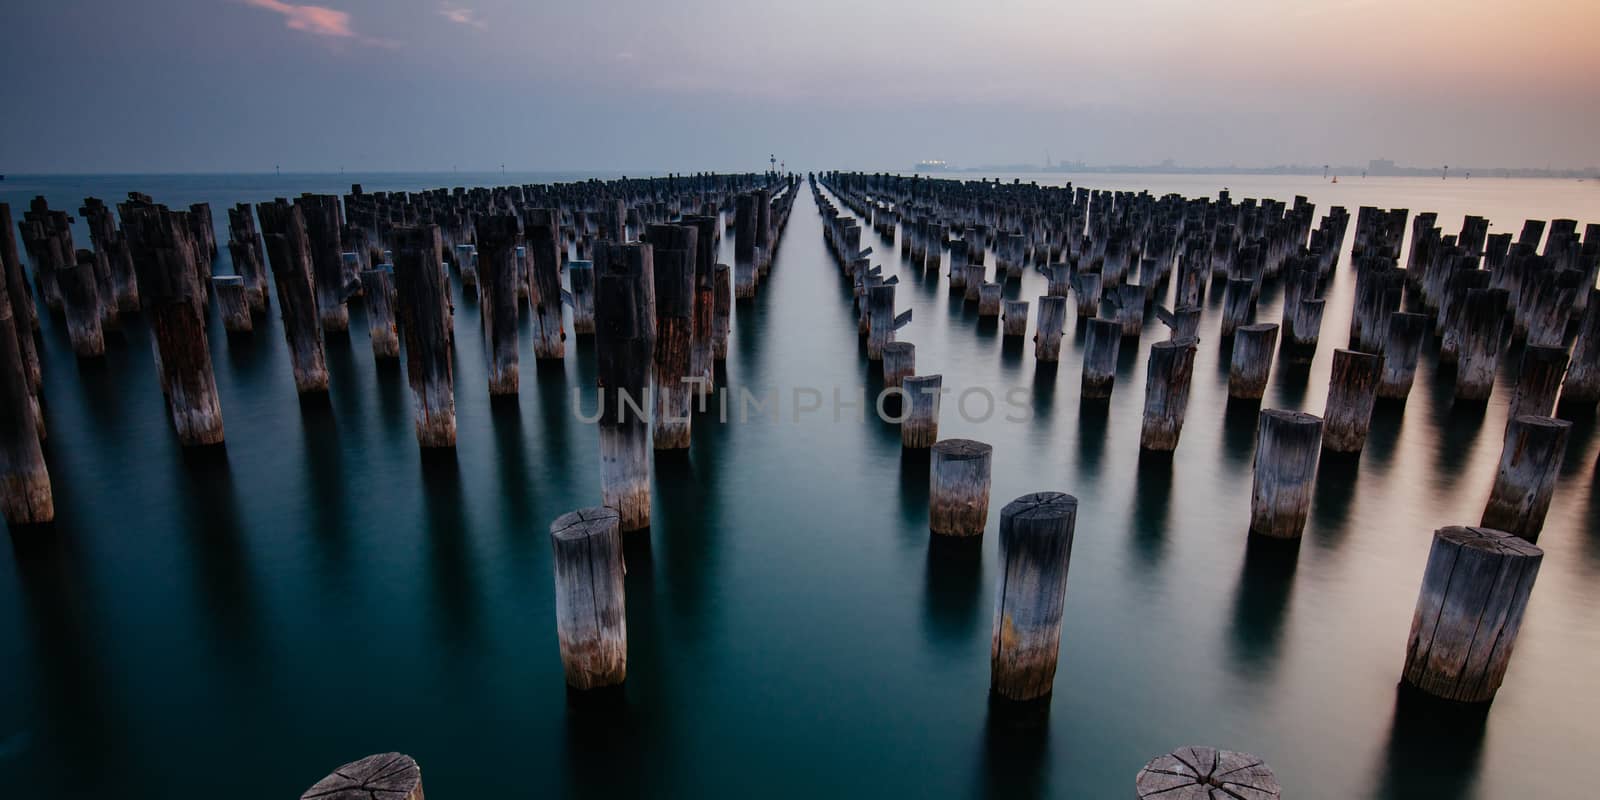 The historic Princes Pier featuring many disused pylons on a hot summer's day in Port Melbourme, Australia